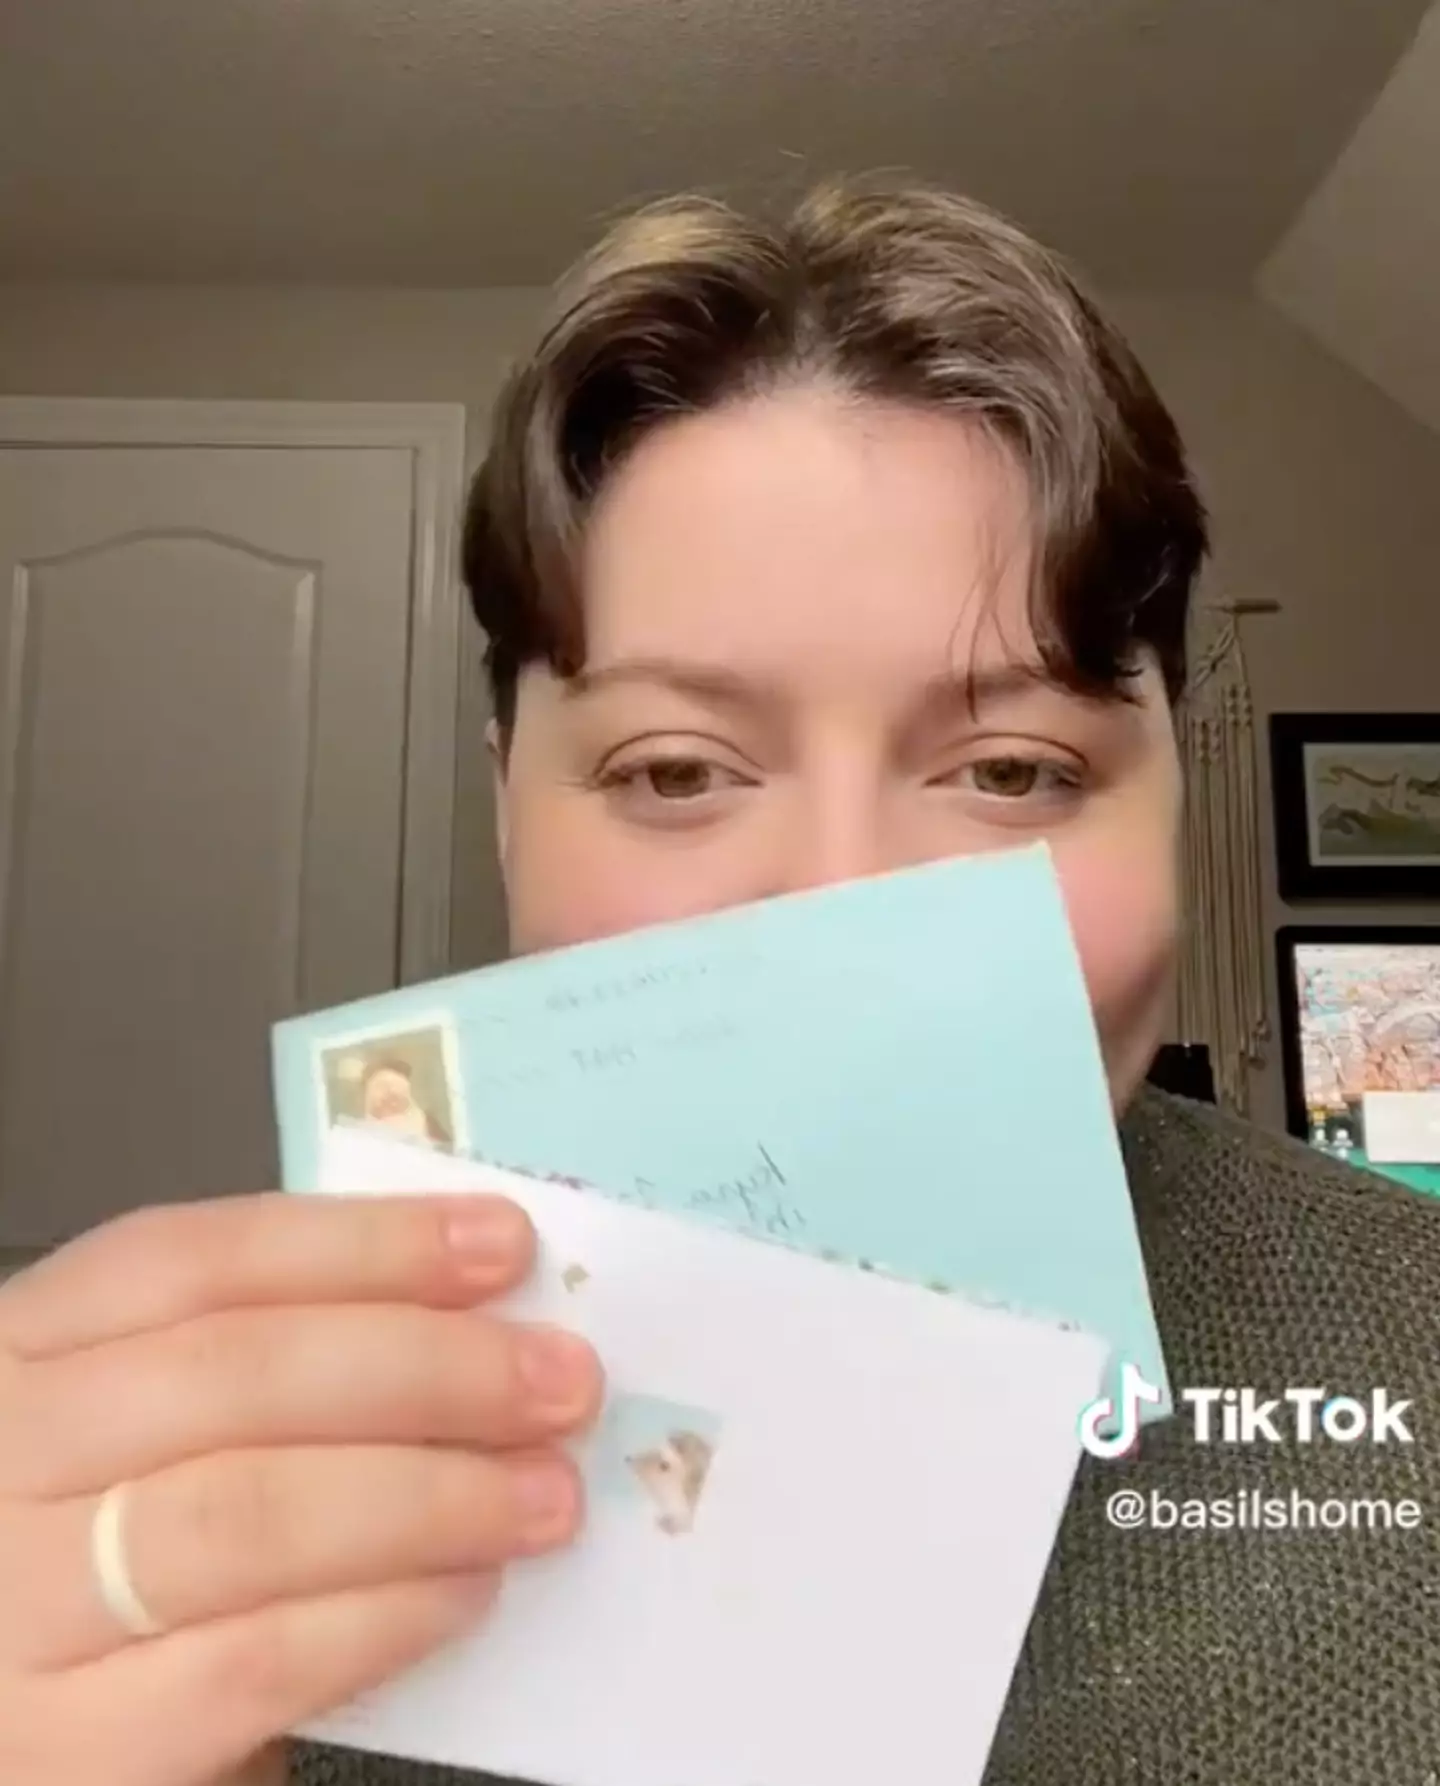 The TikToker received a letter addressed to them and their partner from her mum, dad and dog.